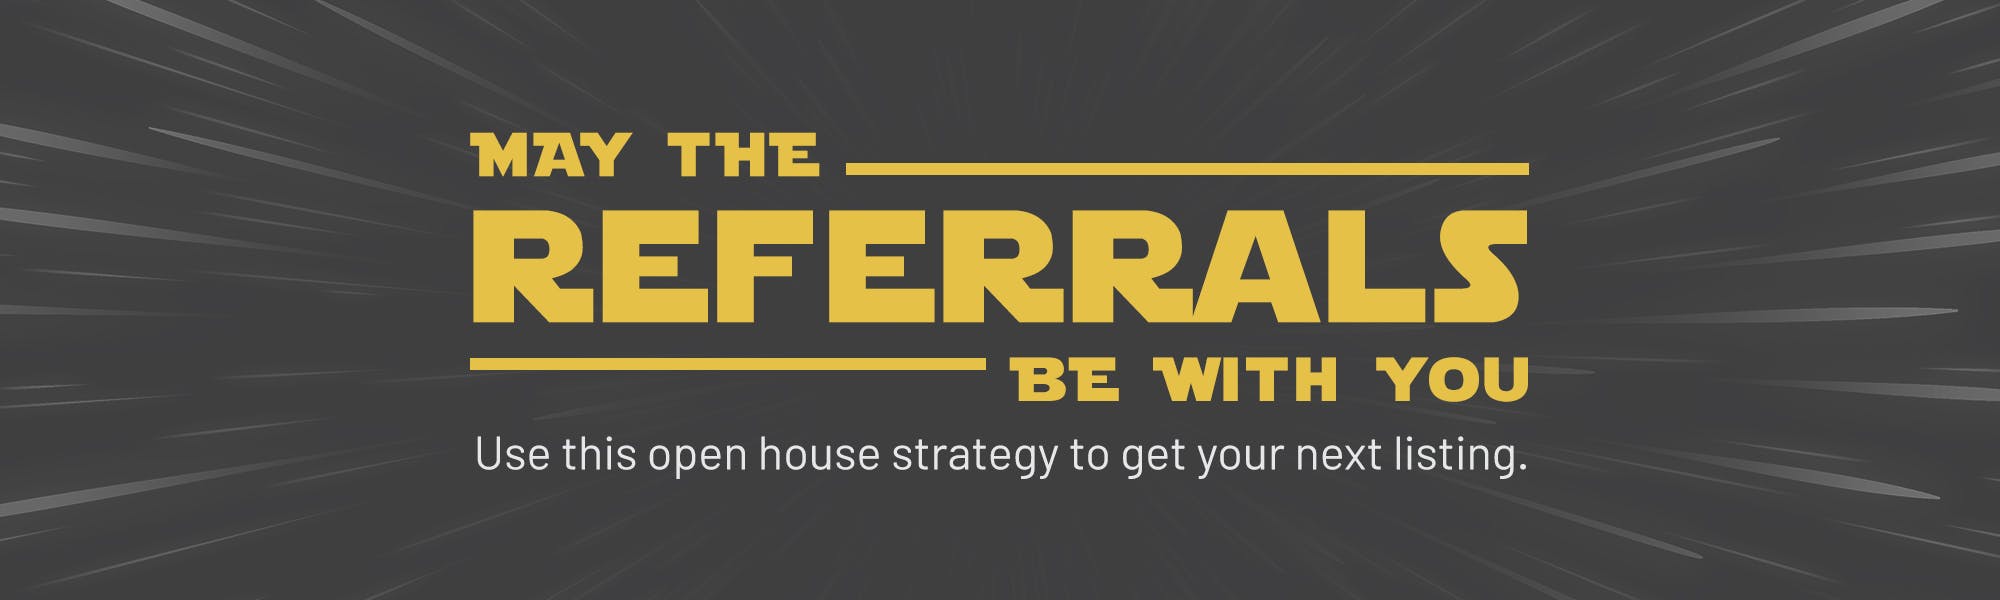 May the referrals be with you! Use this open house strategy to get your next listing.